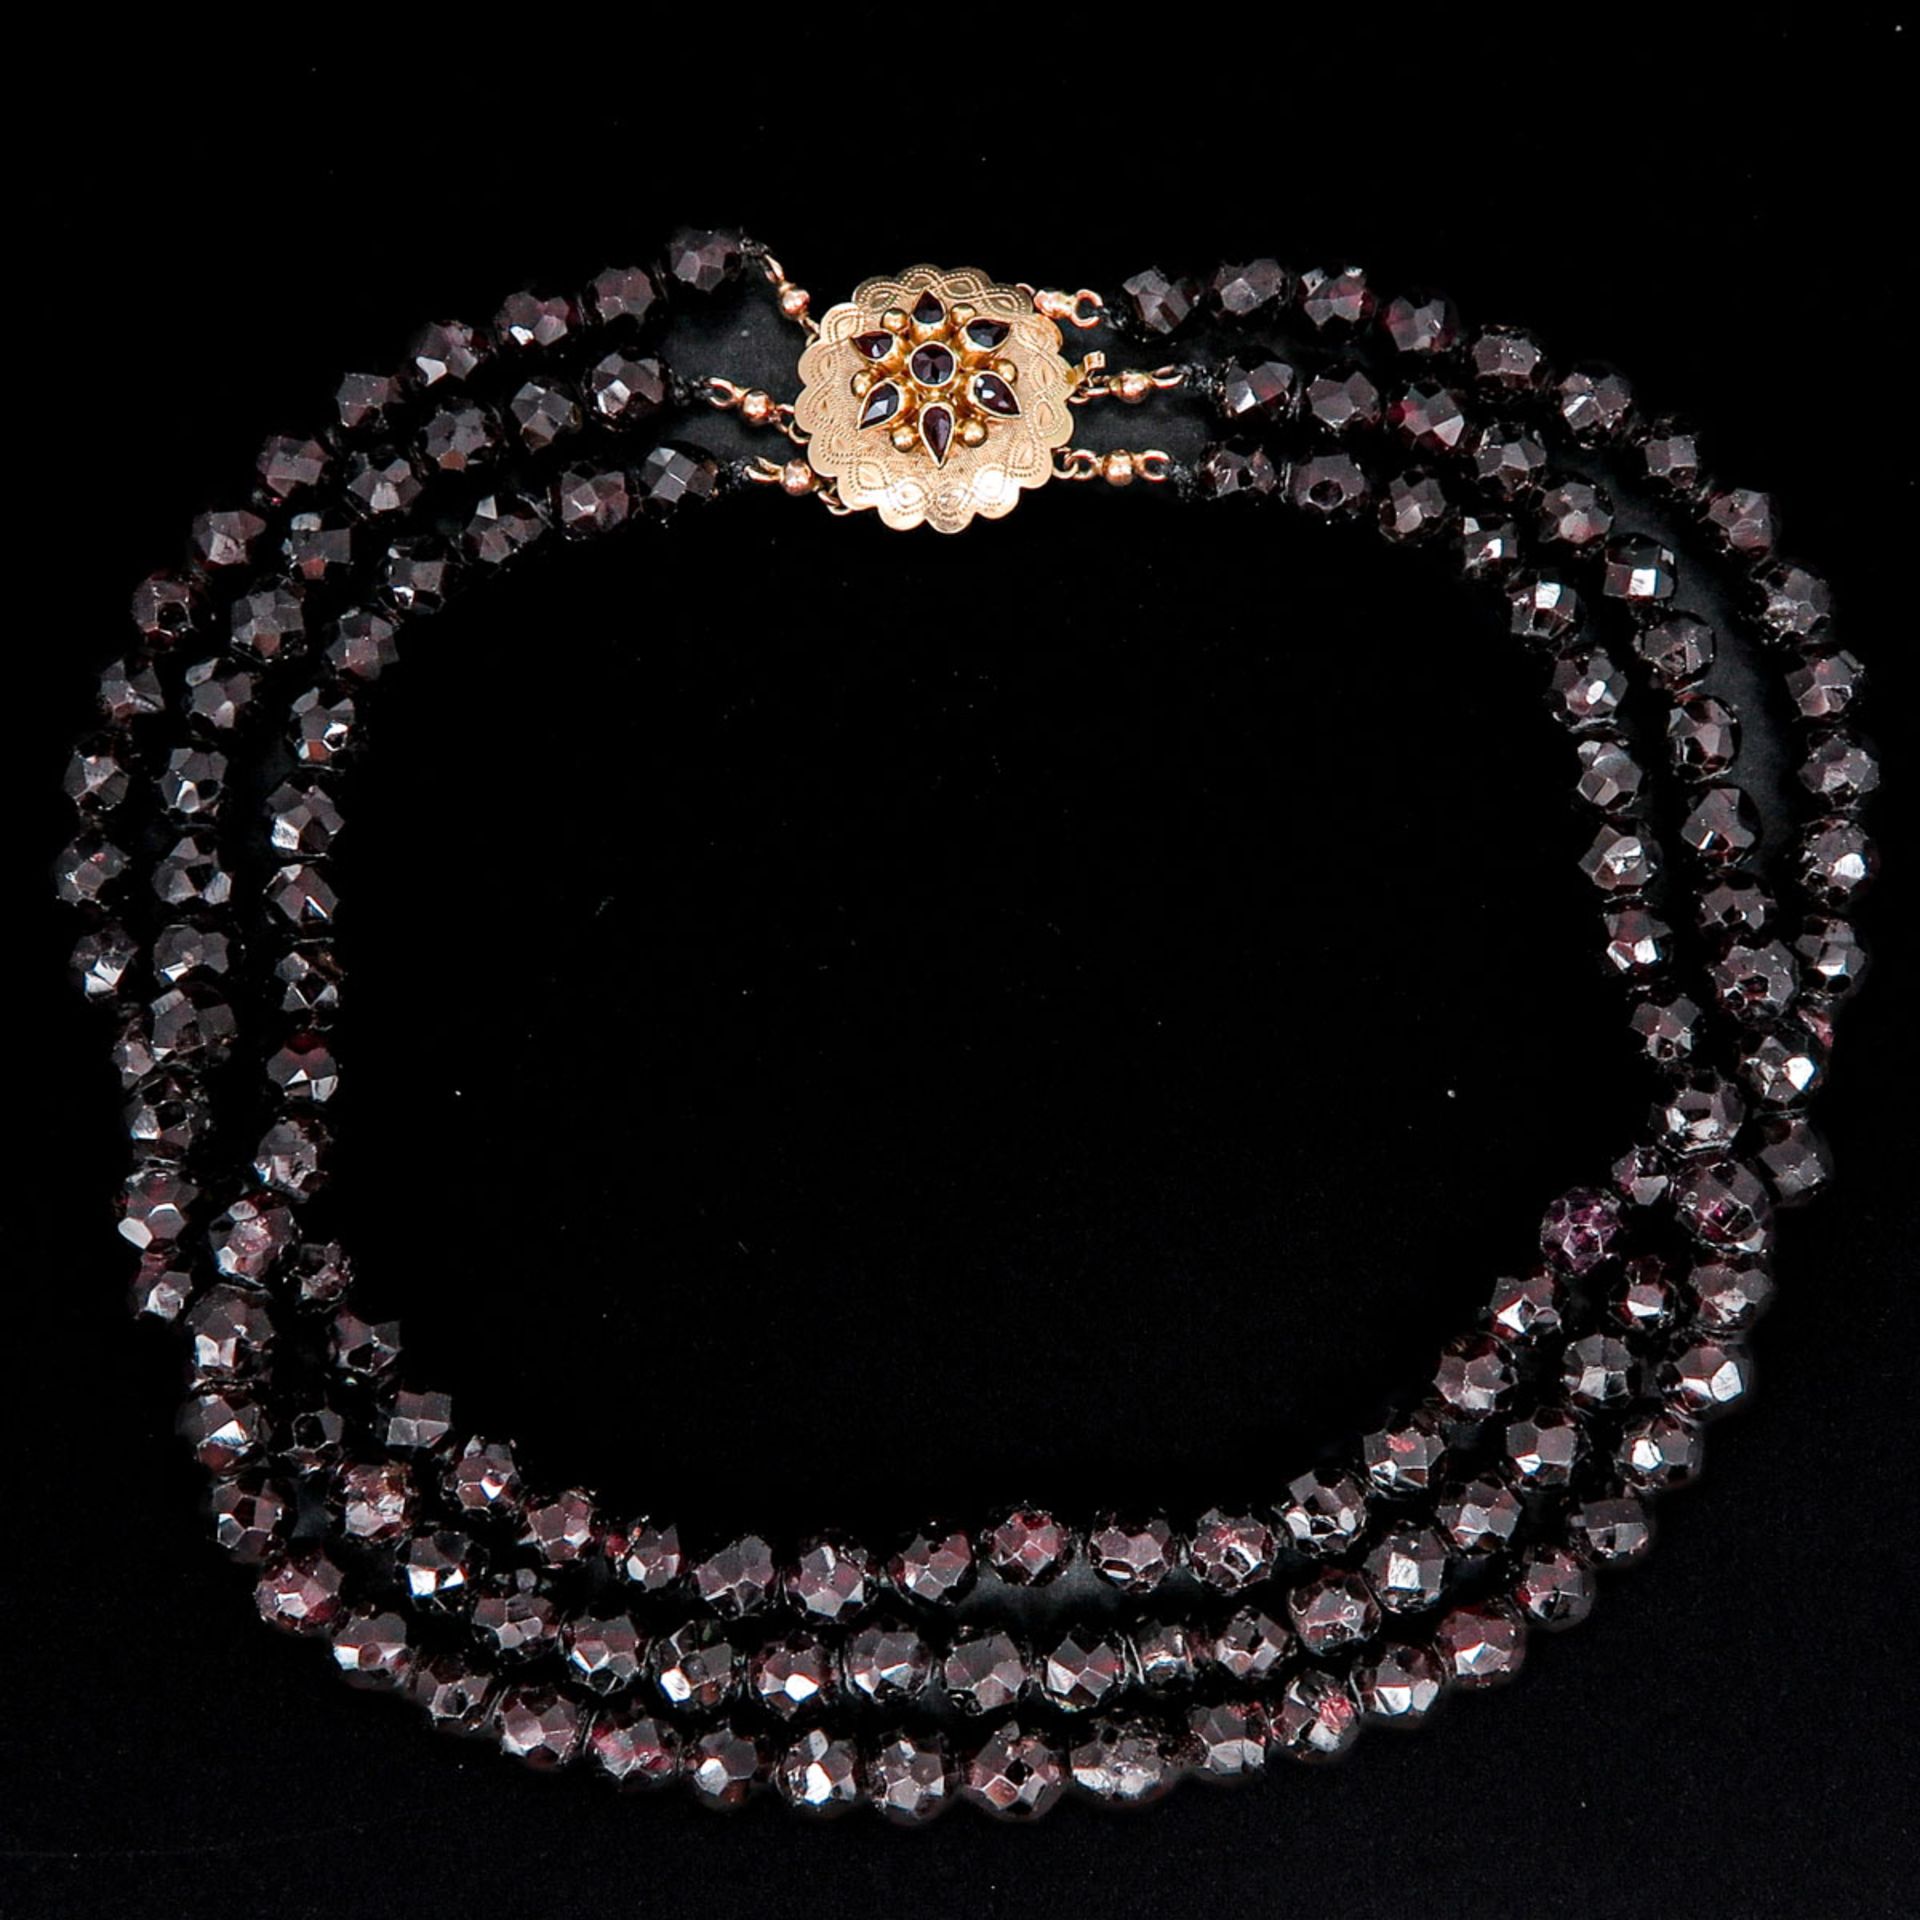 A Triple Strand Garnet Necklace and 14KG Ring - Image 2 of 4